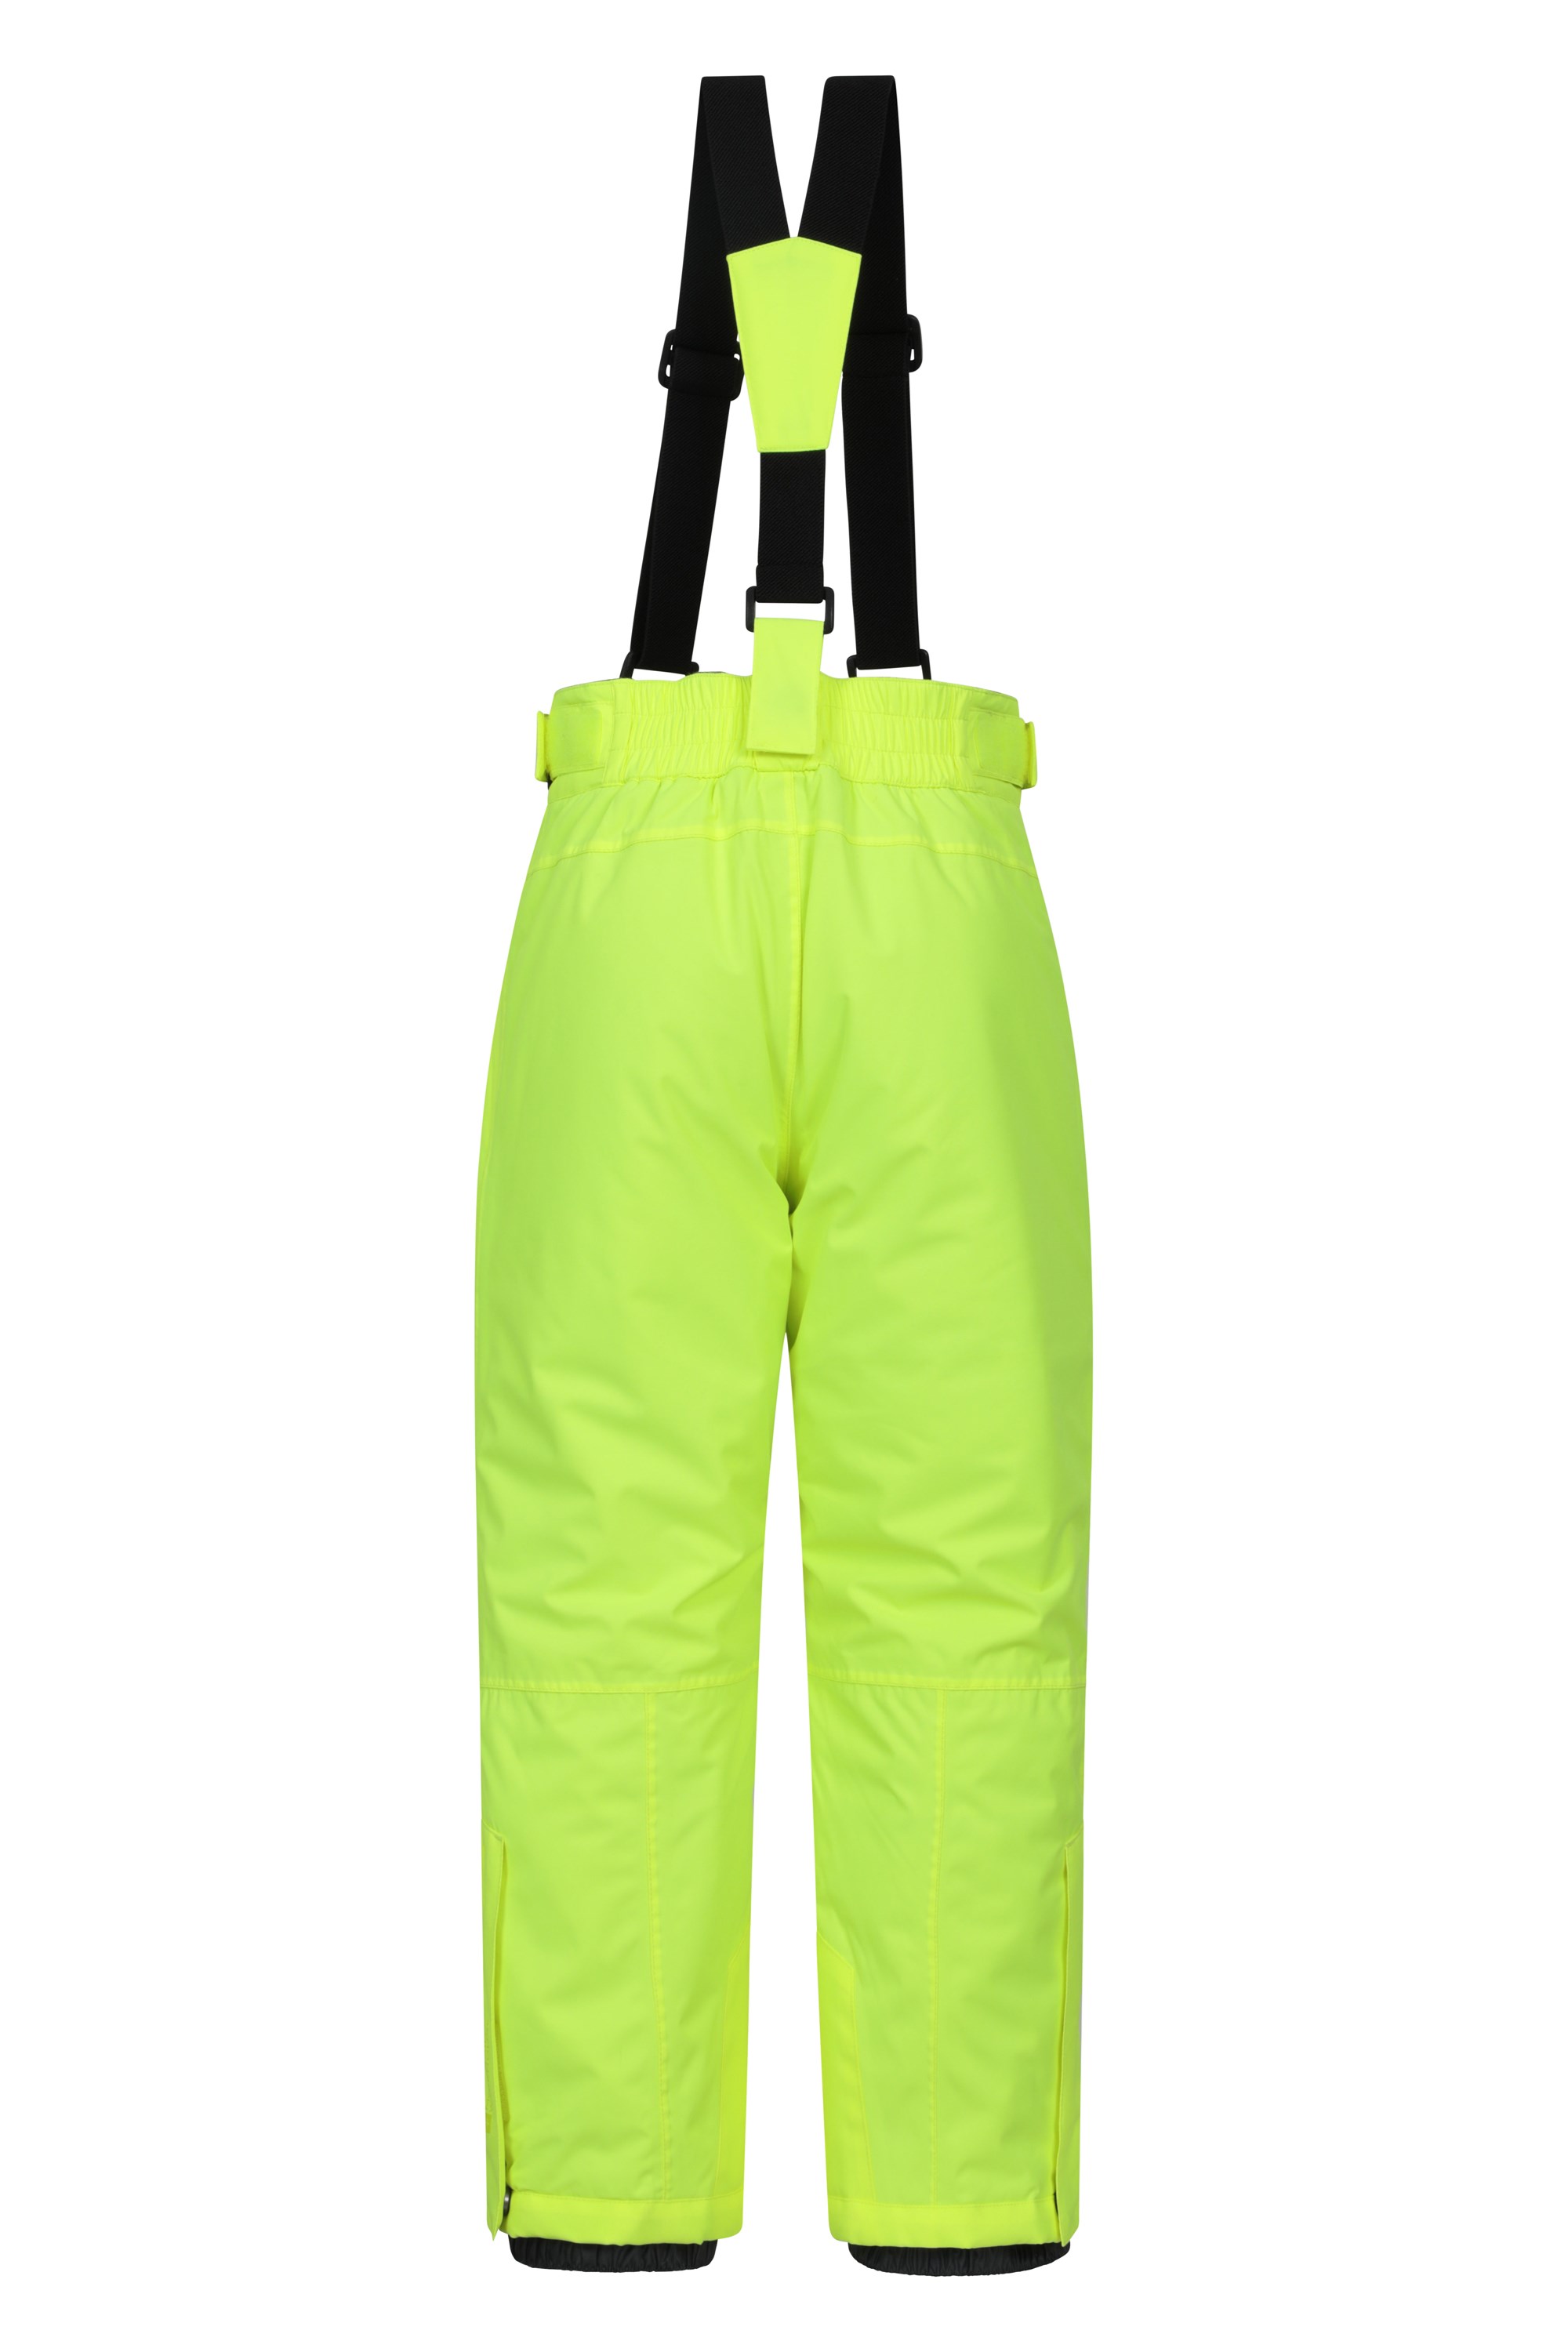 Mountain Warehouse Kids Ski Pants Waterproof Breathable and Insulated 